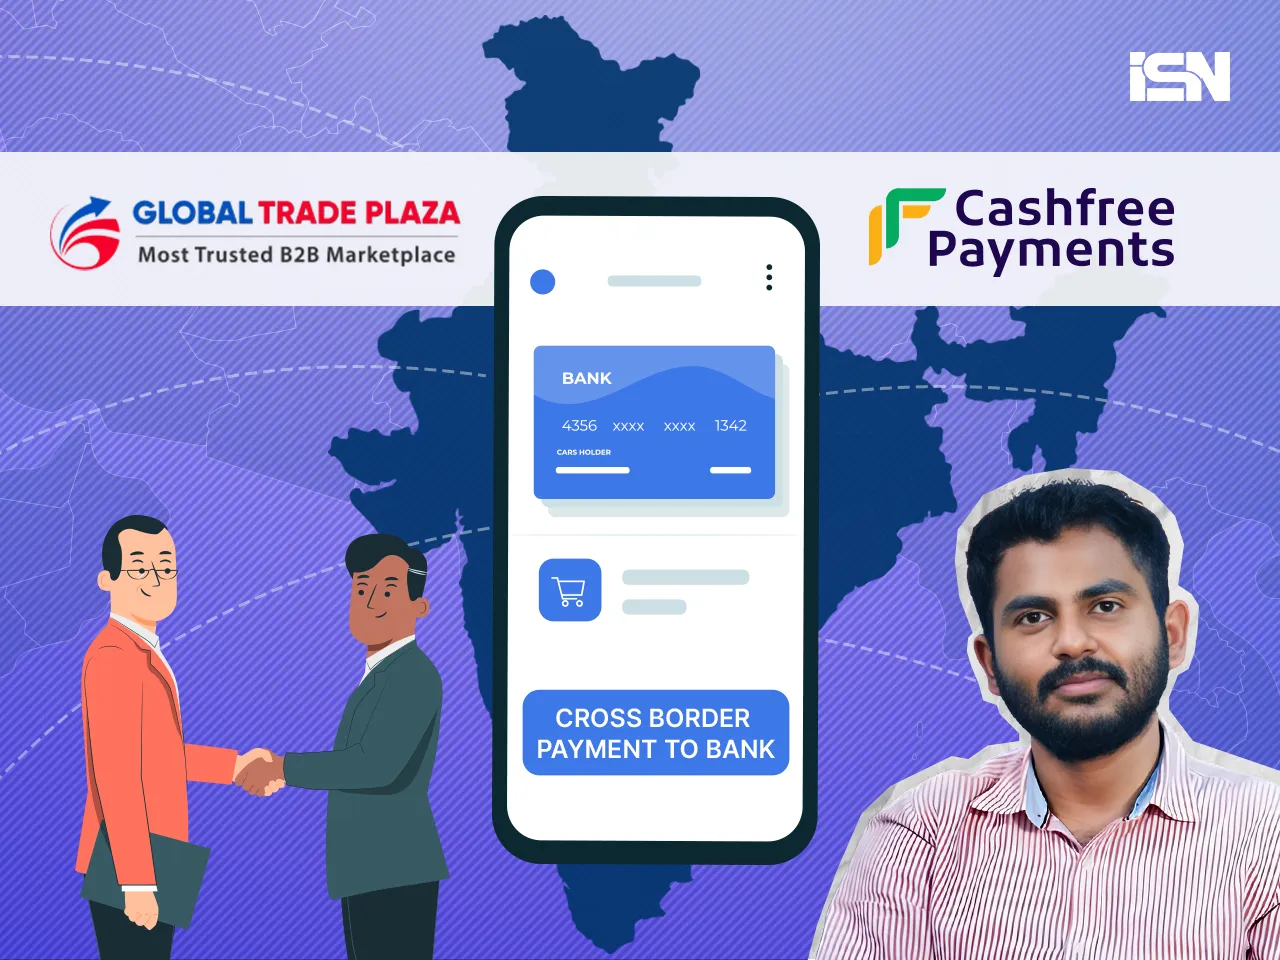 Cashfree payments partners with Global Trade Plaza